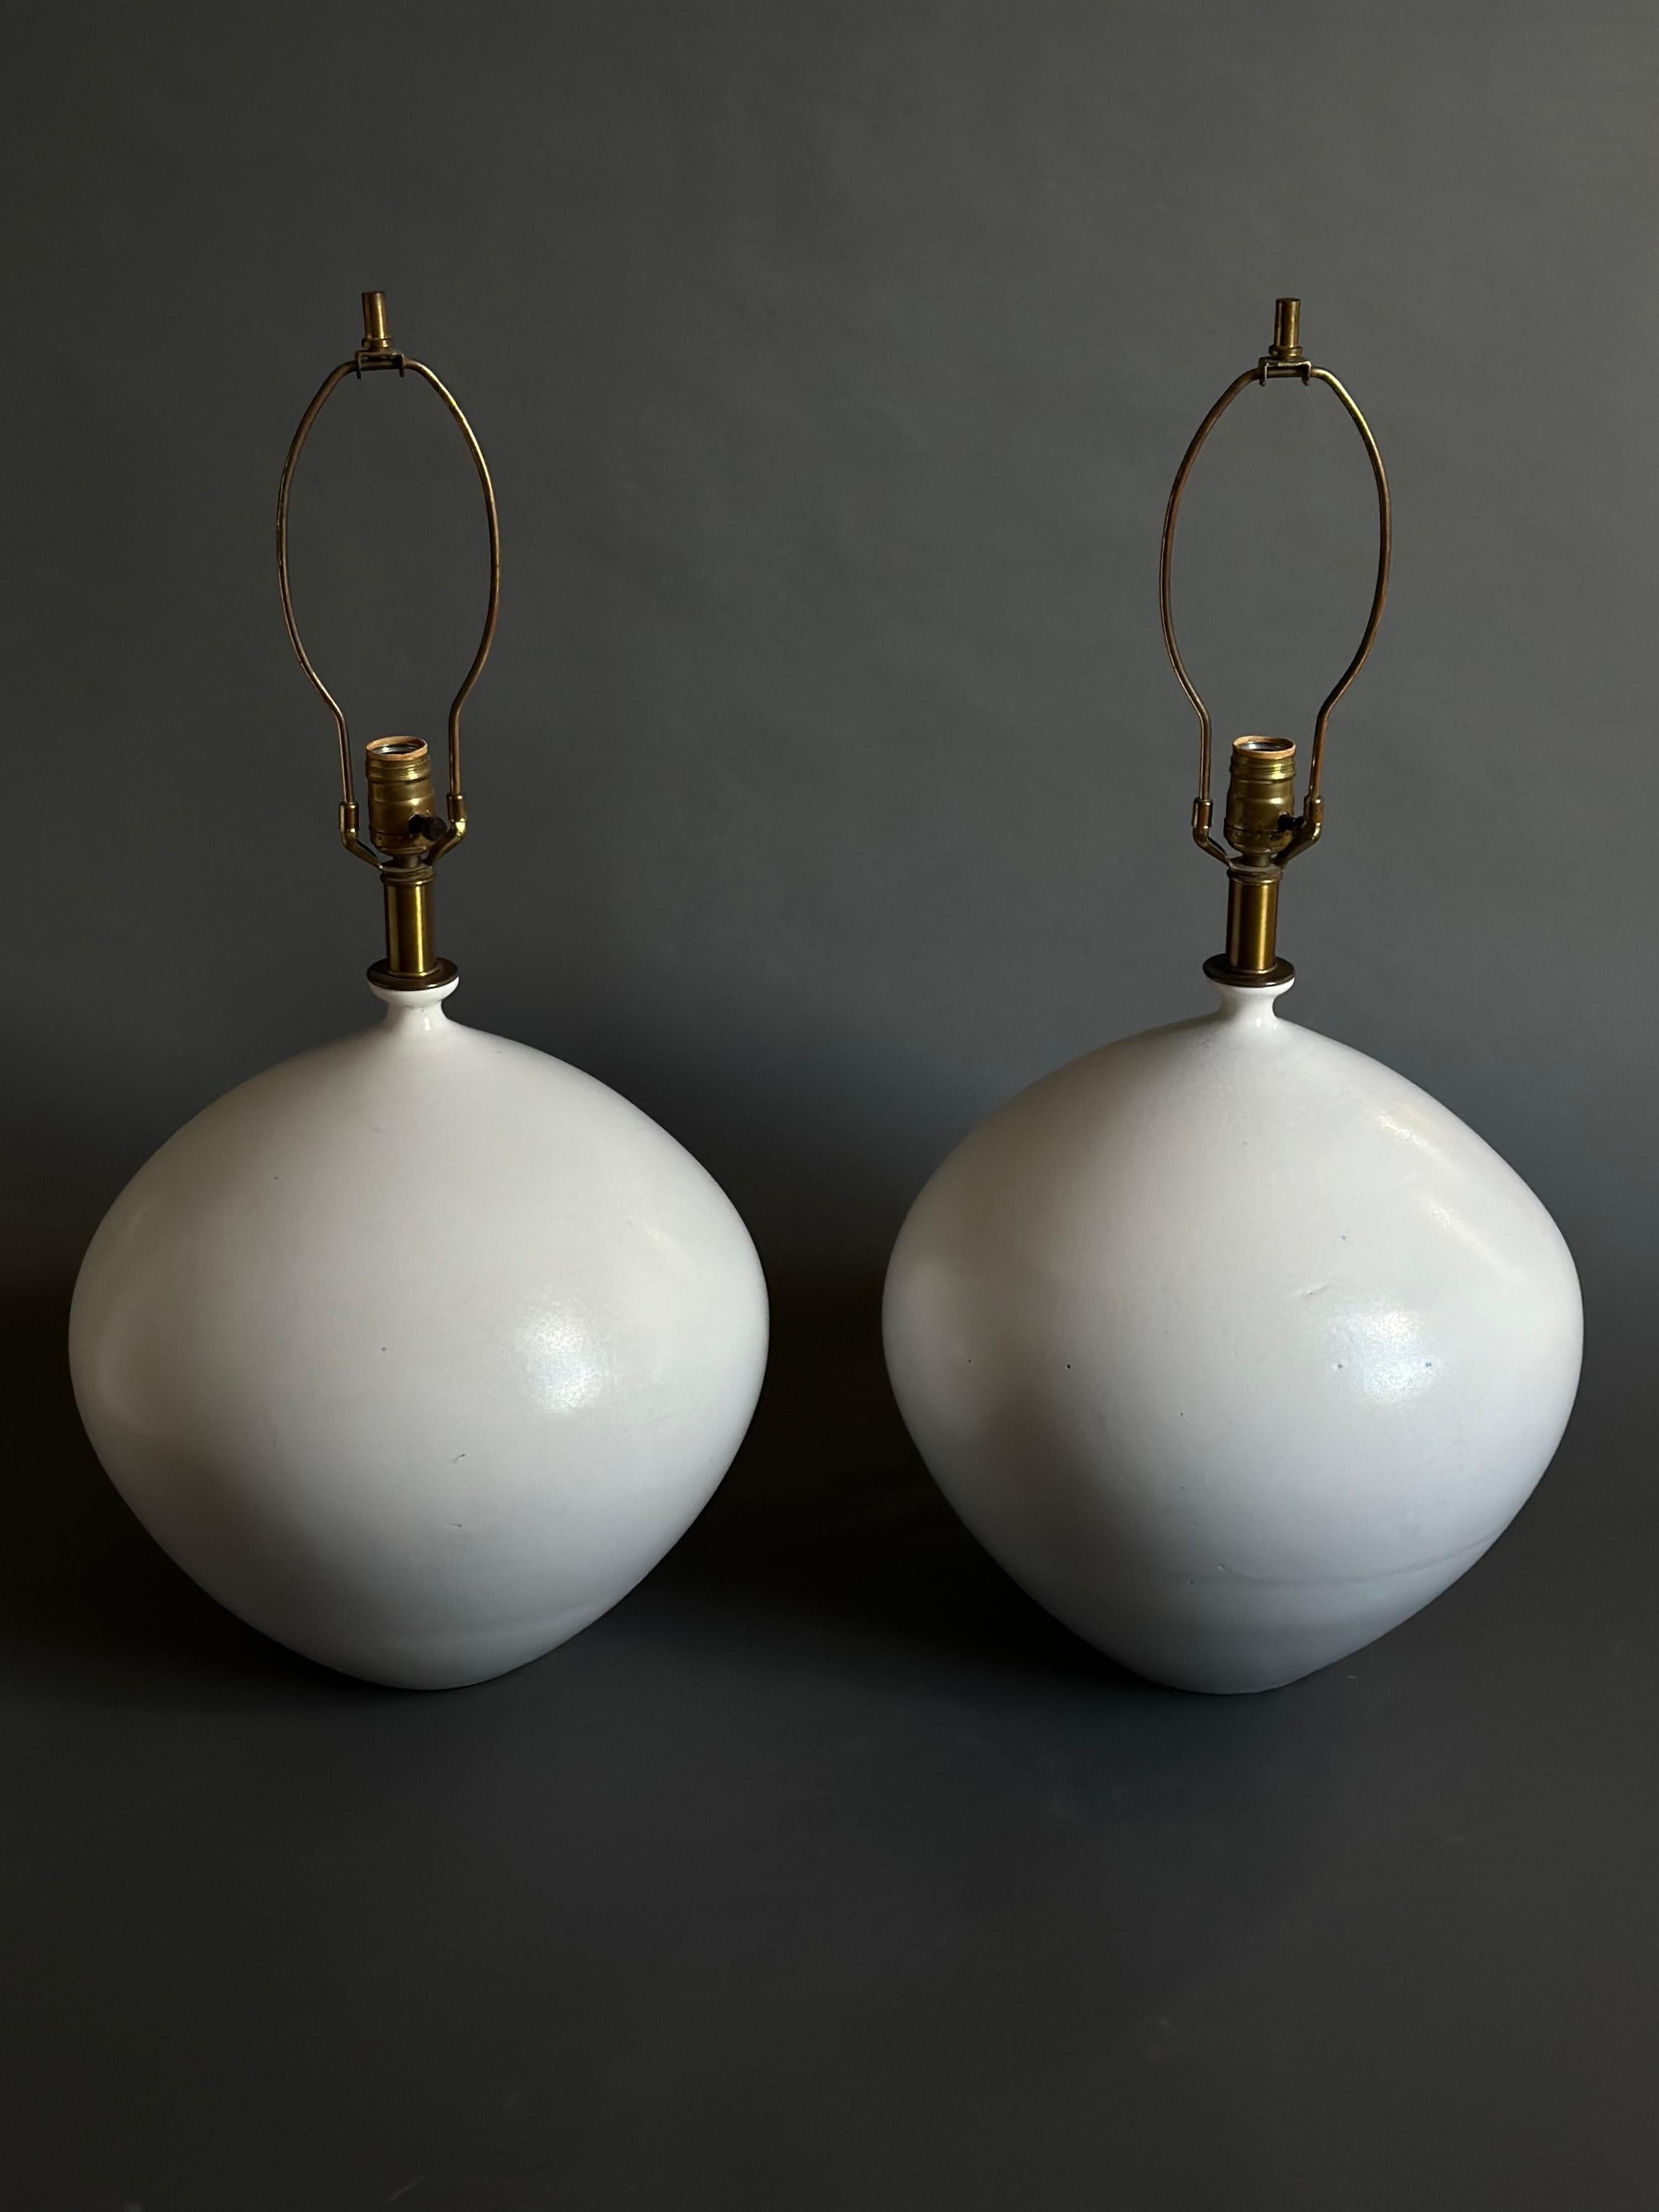 Pair of handthrown, rotund form ceramic table lamps from the 3300 Series, model 3301, designed by Lee Rosen for Design Technics, finished in a matte, milk-white glaze. A robust design with each lamp weighing 25 pounds. Both signed with the 'DT'